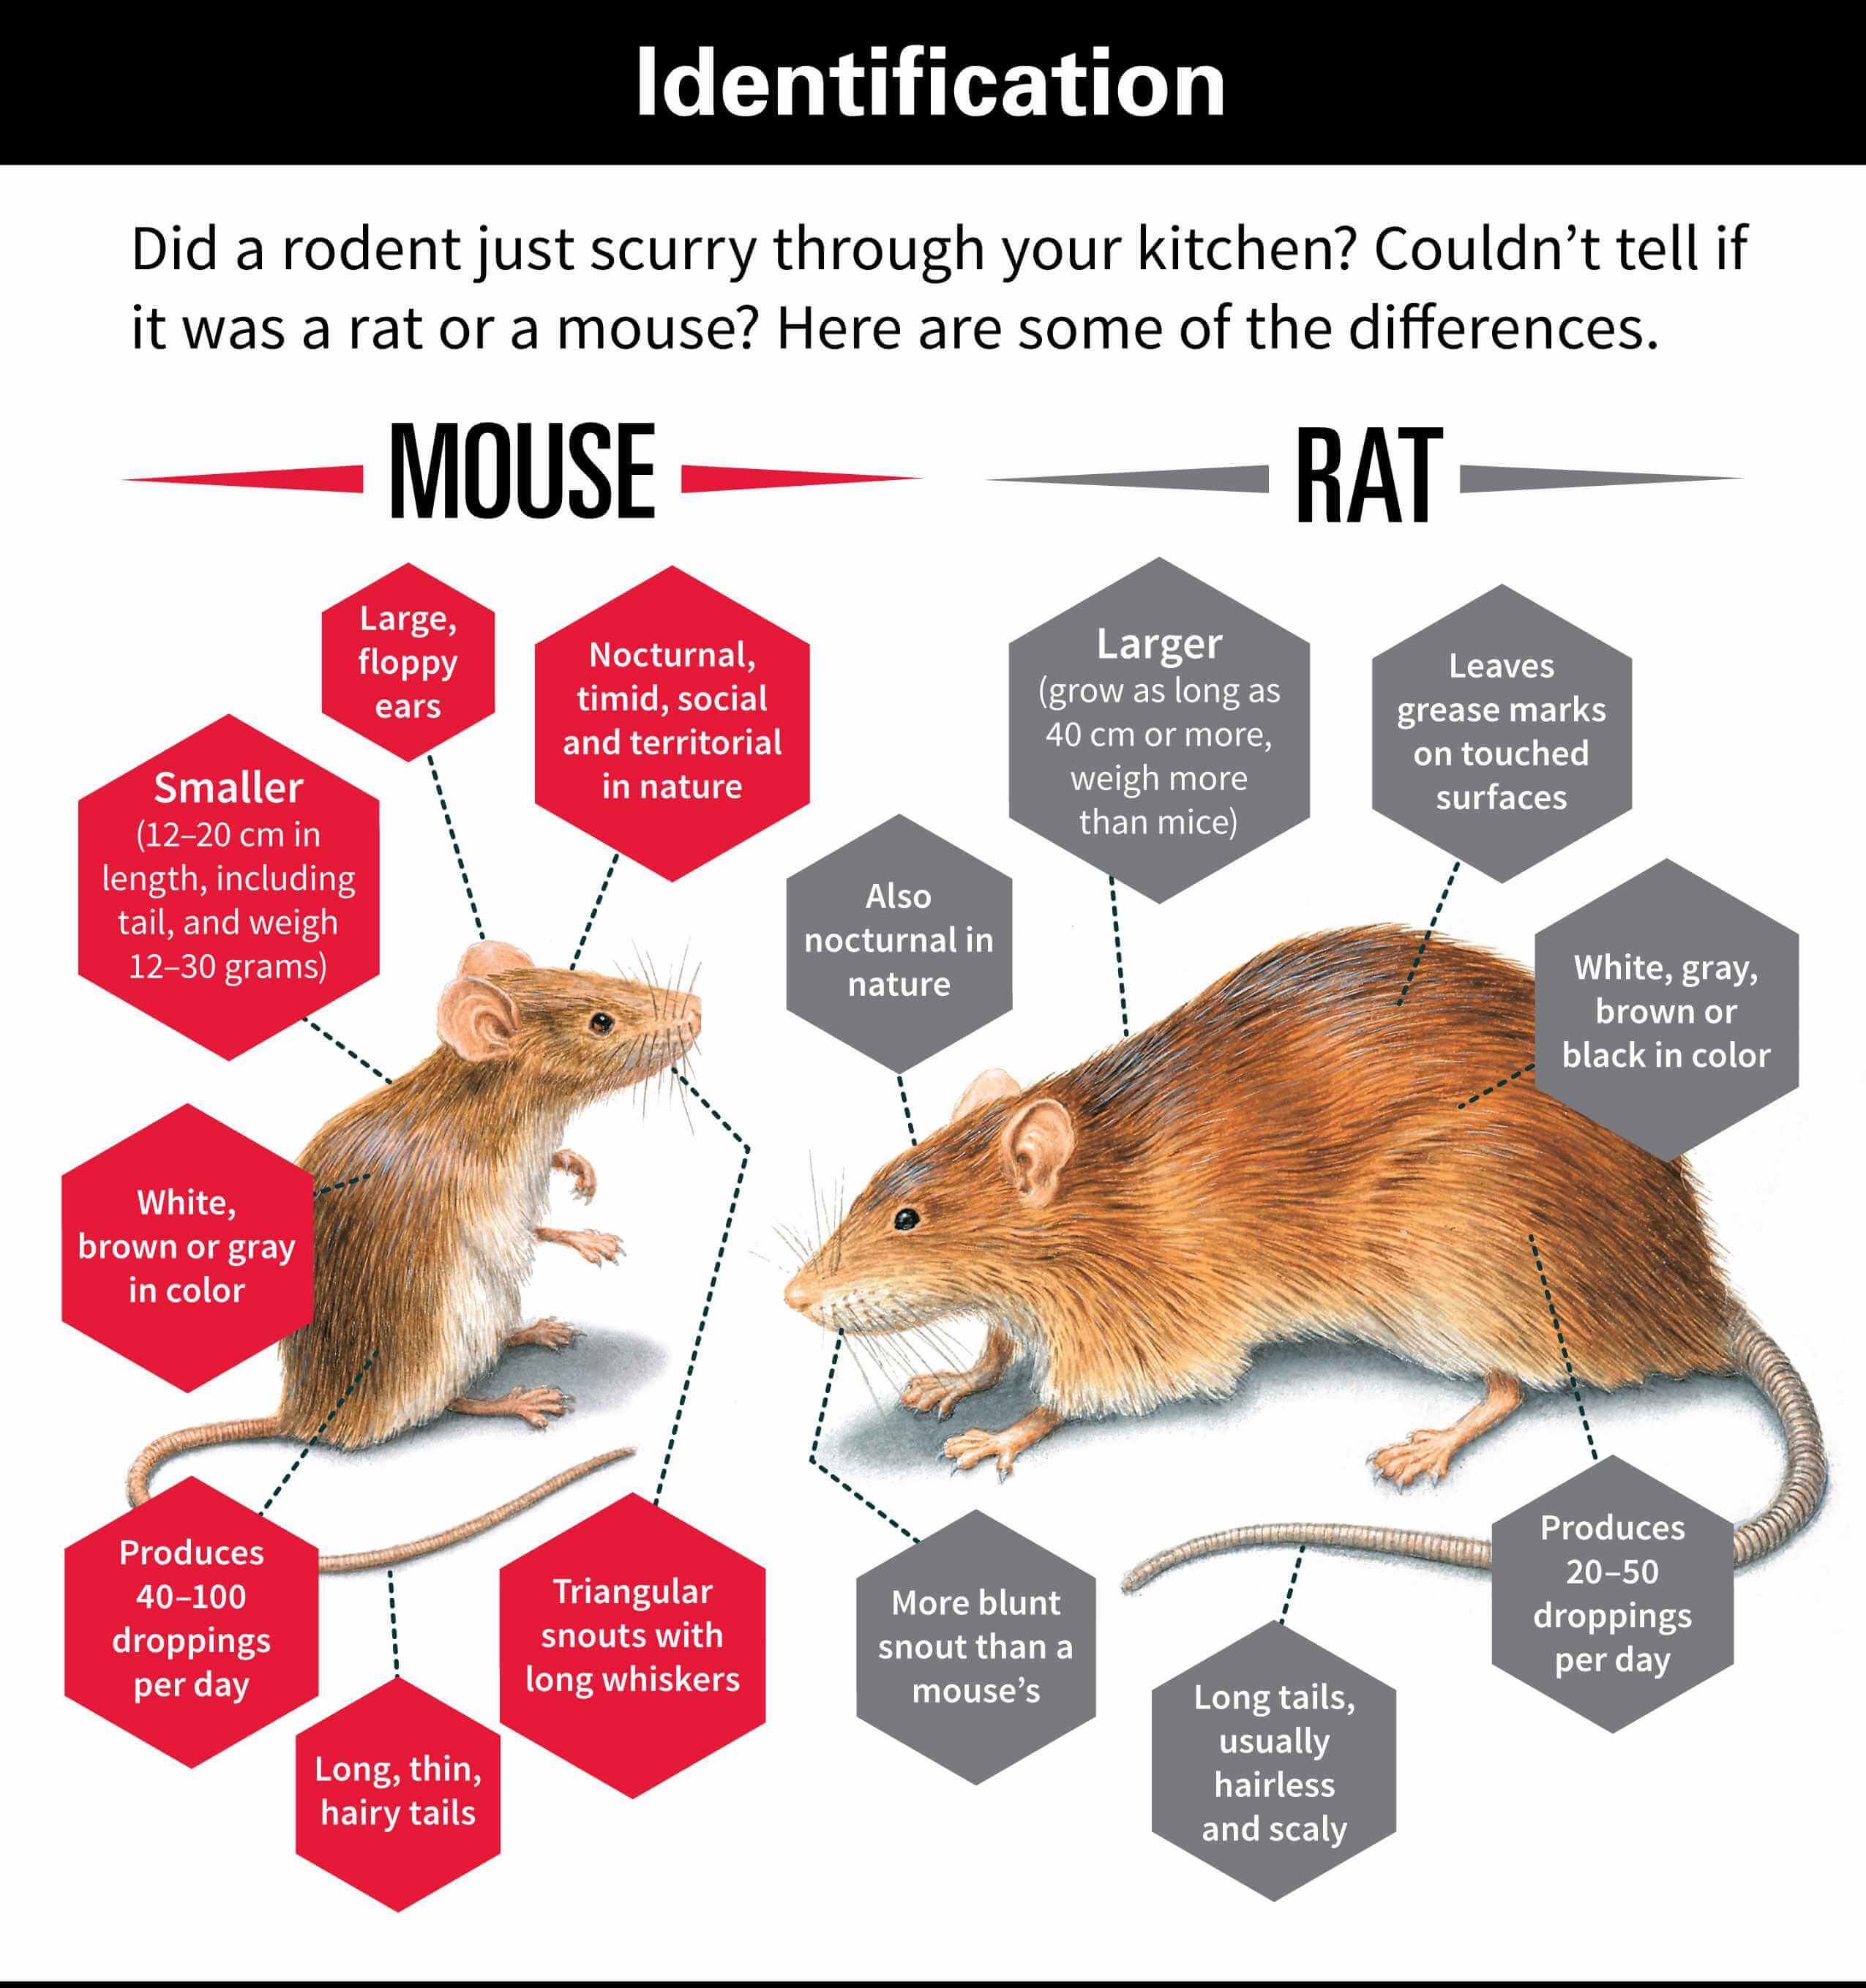 Plural form of mouse